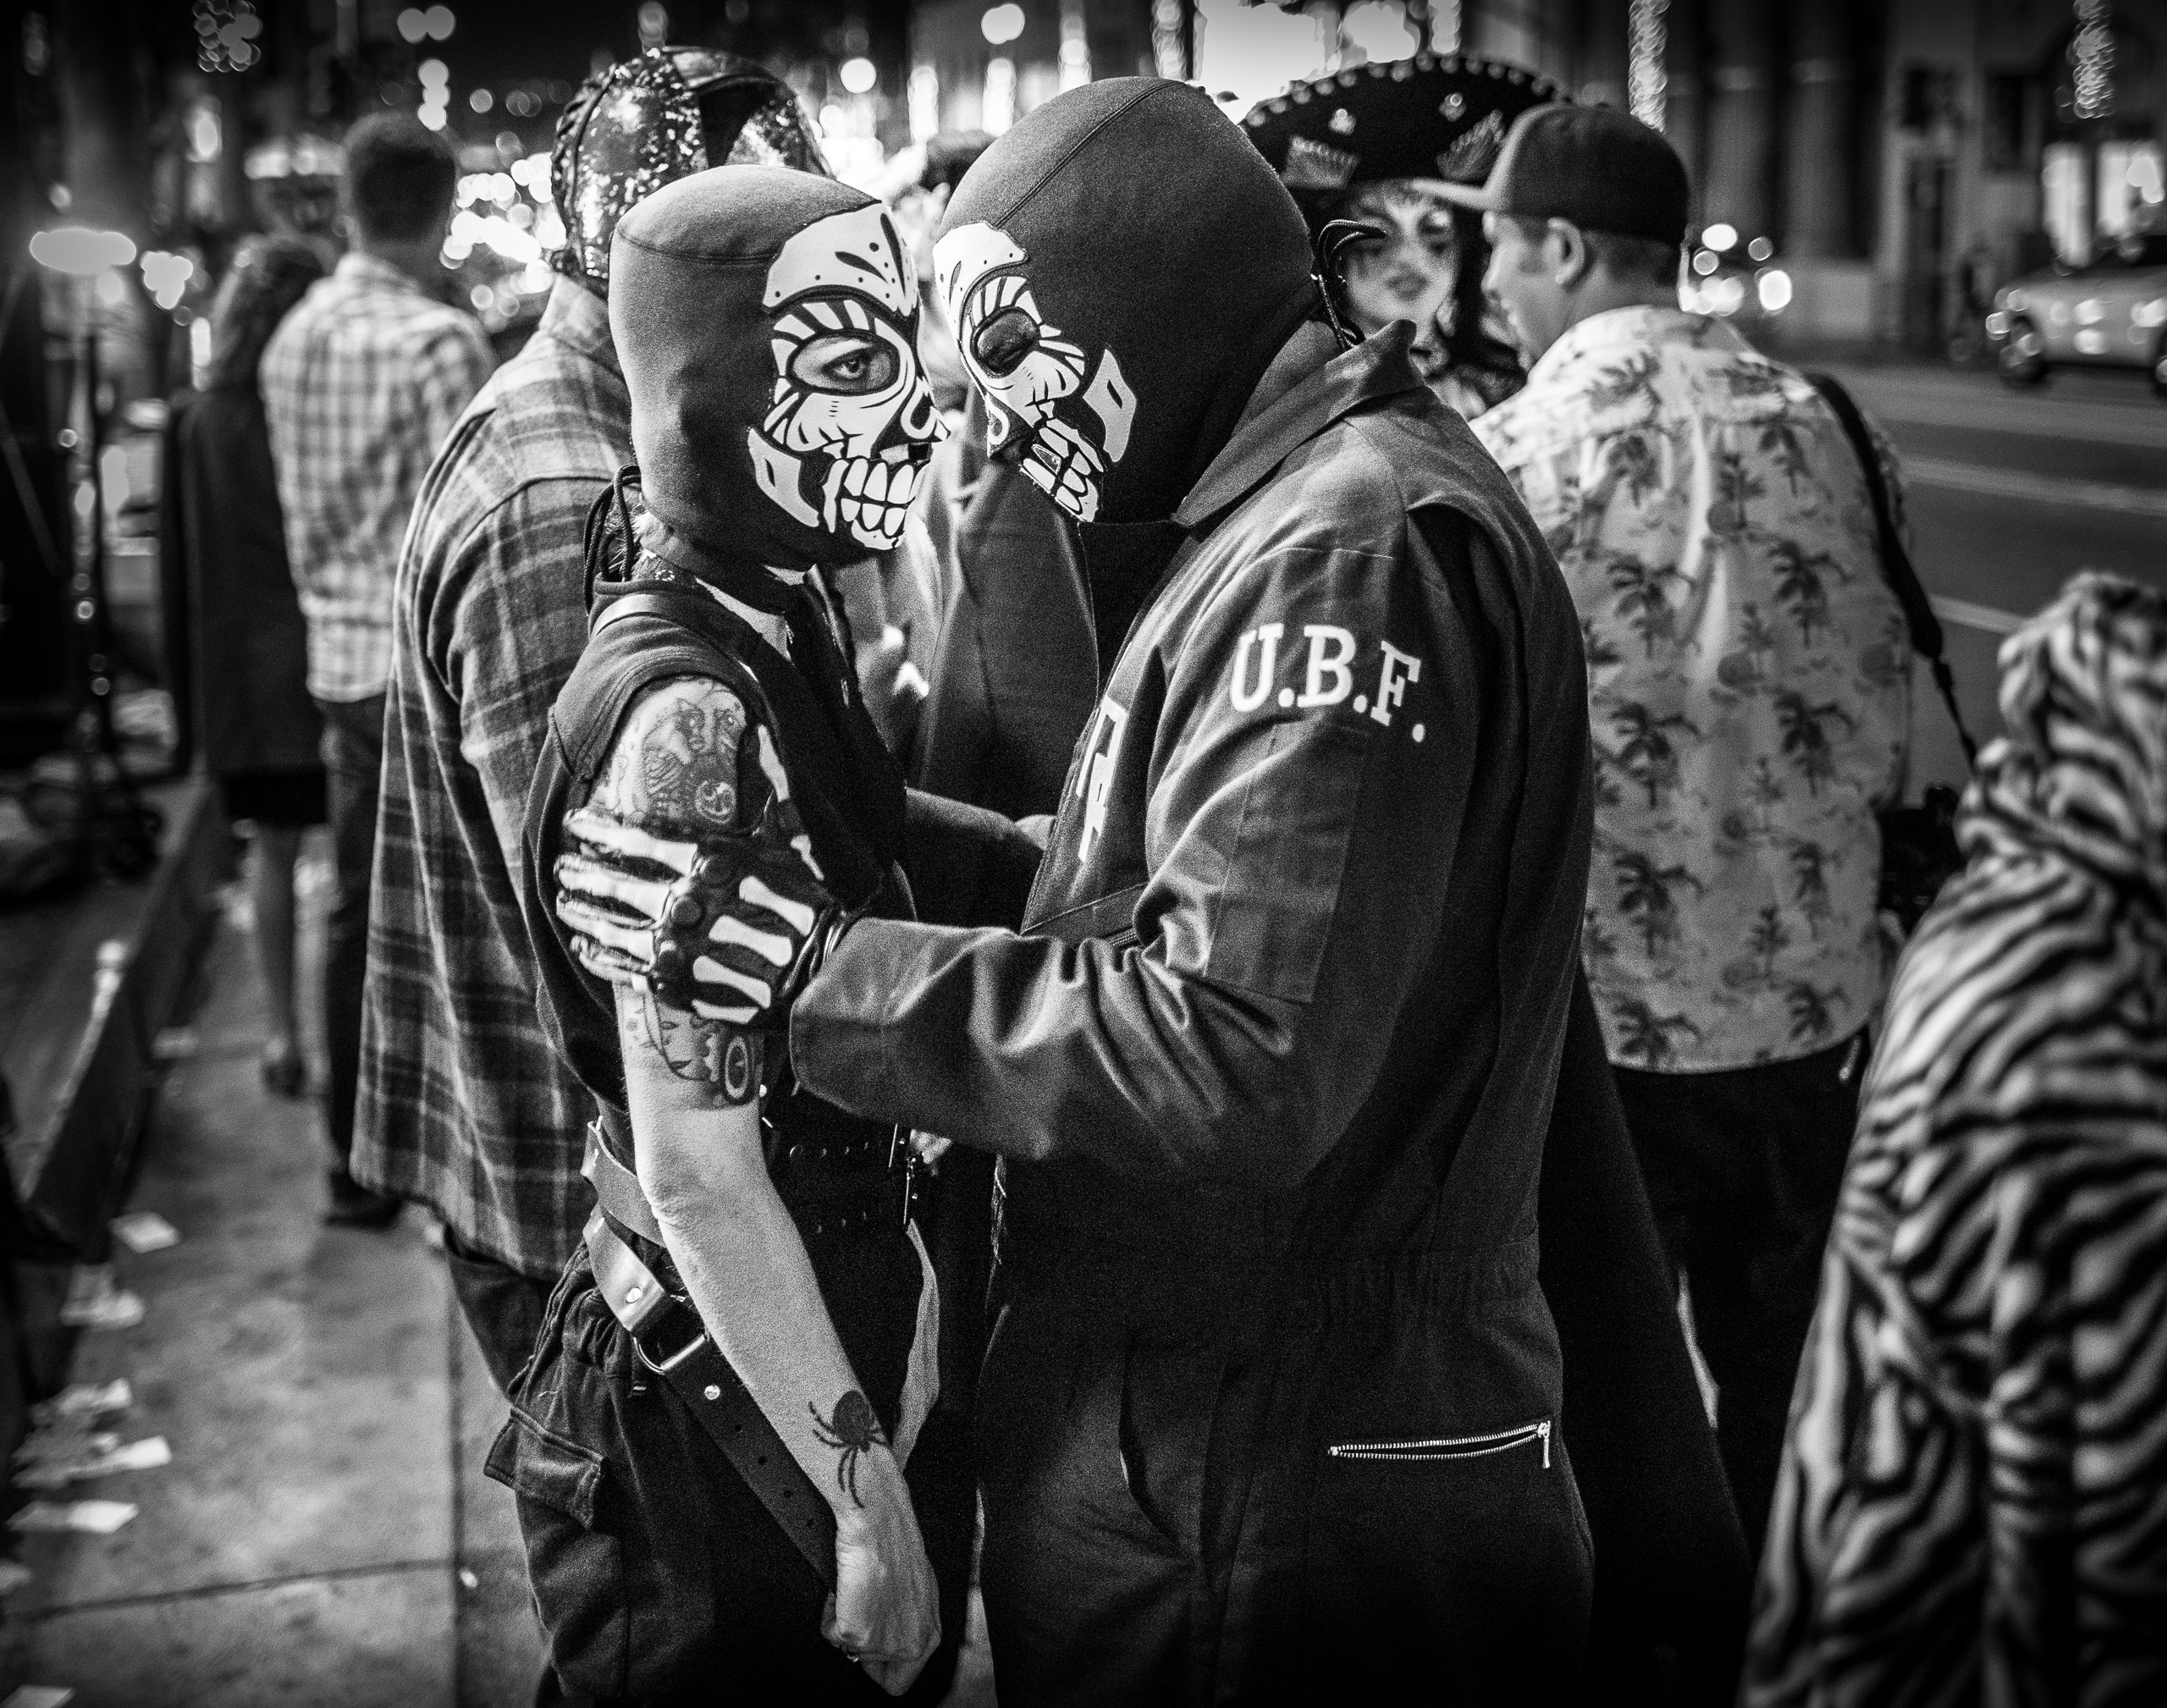 two people in skeleton costumes share a tender moment on the street. Hollywood Blvd, Hollywood, California.